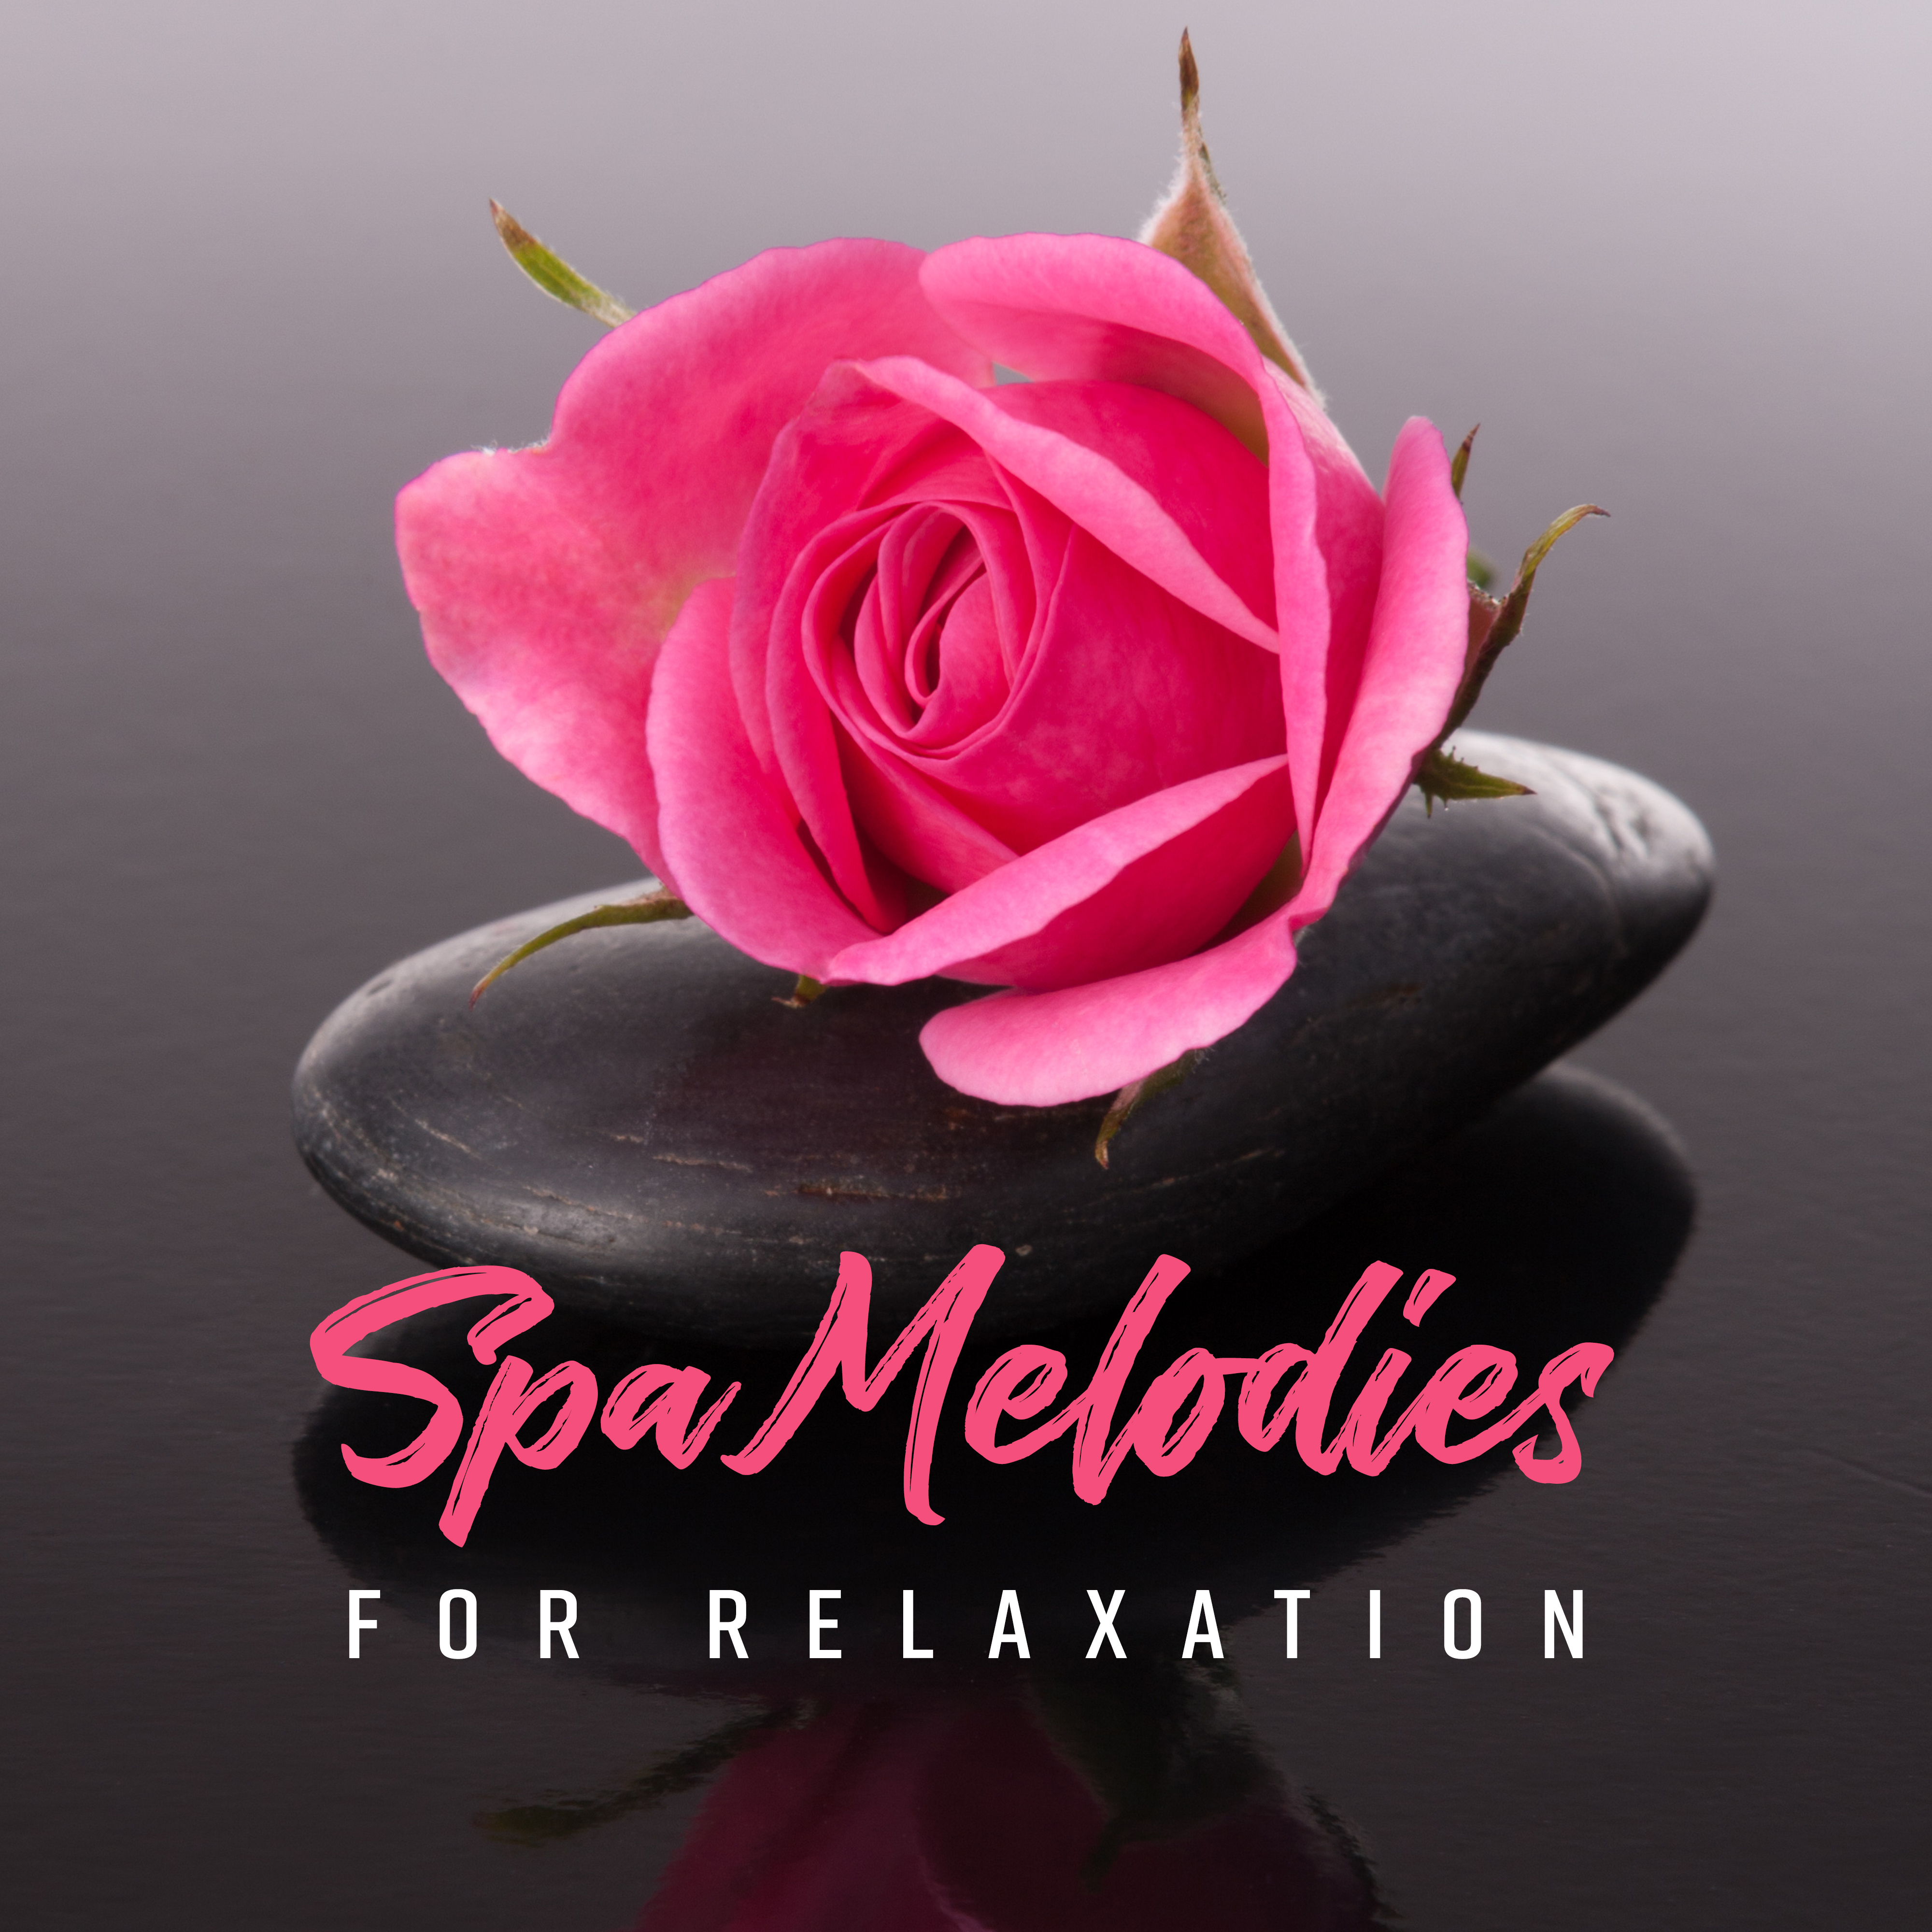 Spa Melodies for Relaxation